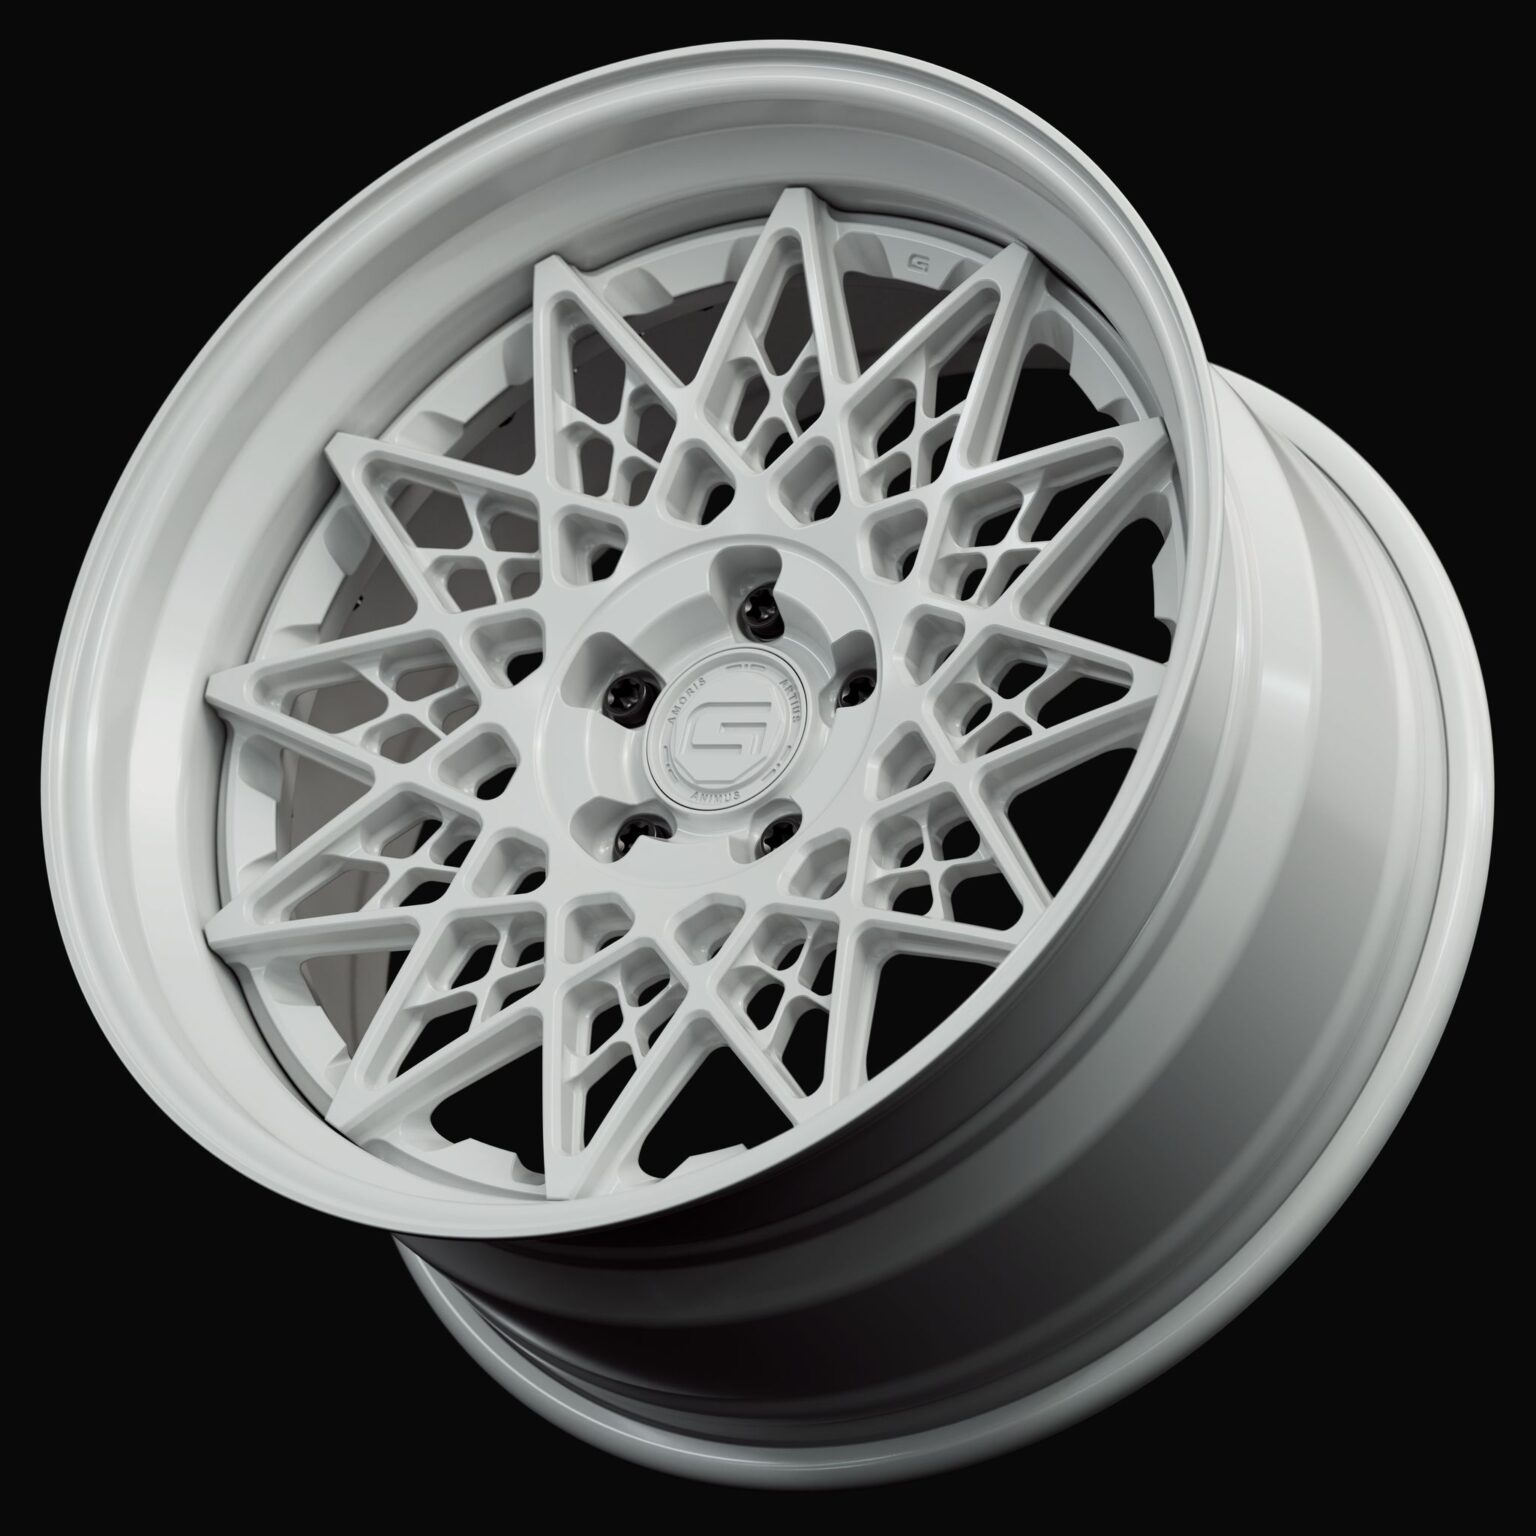 Three-quarter view of a white G21 3-piece wheel from Govad Forged Heritage series